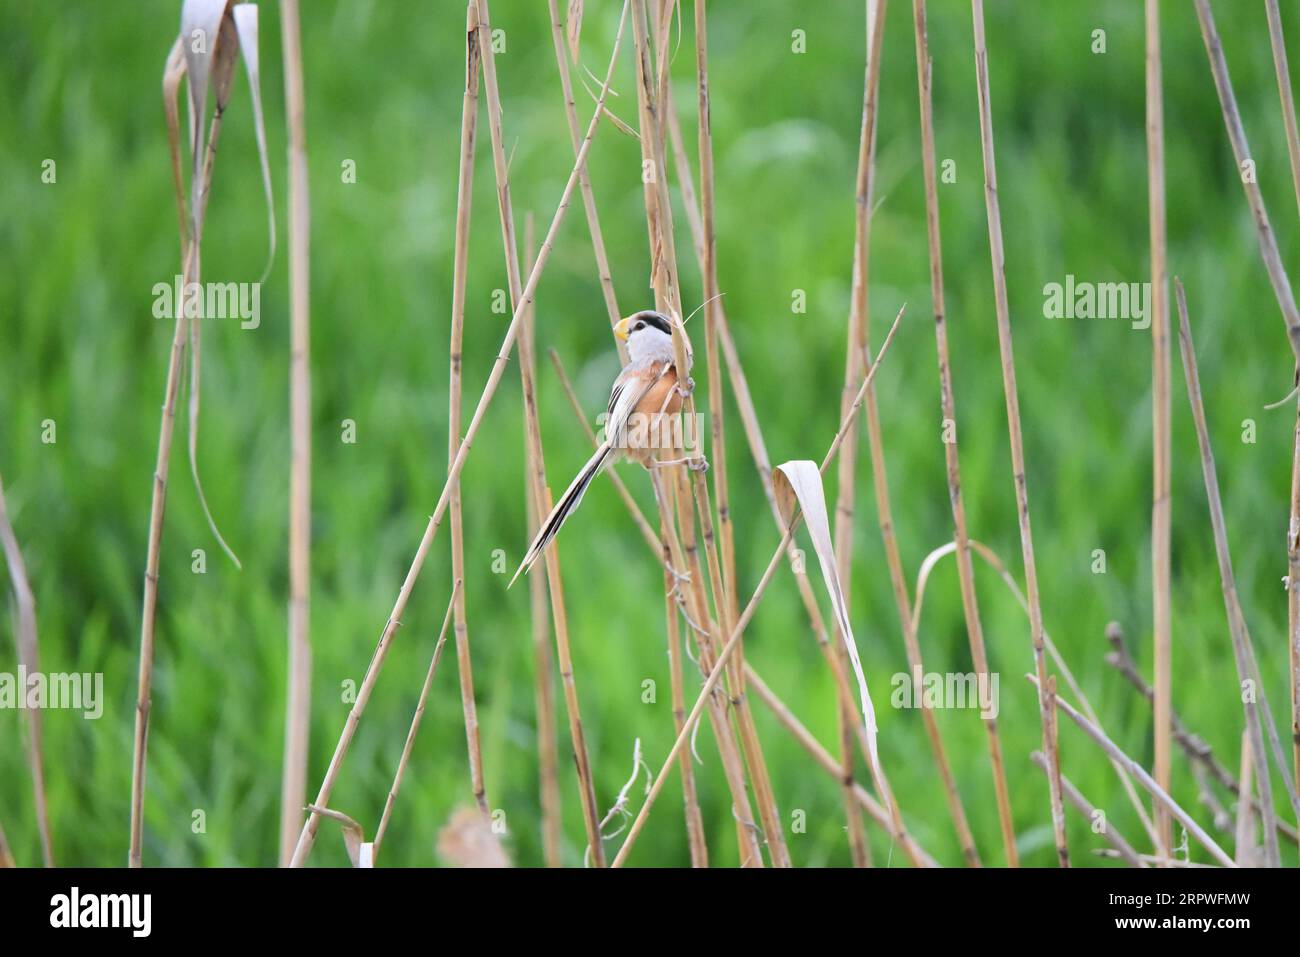 200426 -- LIANYUNGANG, April 26, 2020 Xinhua -- A reed parrotbill perches on straw in Lianyungang, east China s Jiangsu Province, April 14, 2020. A biodiversity survey team said Sunday that they have found more than 50 reed parrotbills in an area of marshland in Lianyungang City. Reed parrotbills mainly inhabit reed marshes and similar habitats in coastal areas of east China, and the species was classified as near threatened by the International Union for Conservation of Nature s Red List of Threatened Species. Photo by Wang Mingqiang/Xinhua CHINA-JIANGSU-LIANYUNGANG-RARE BIRD CN PUBLICATIONxN Stock Photo